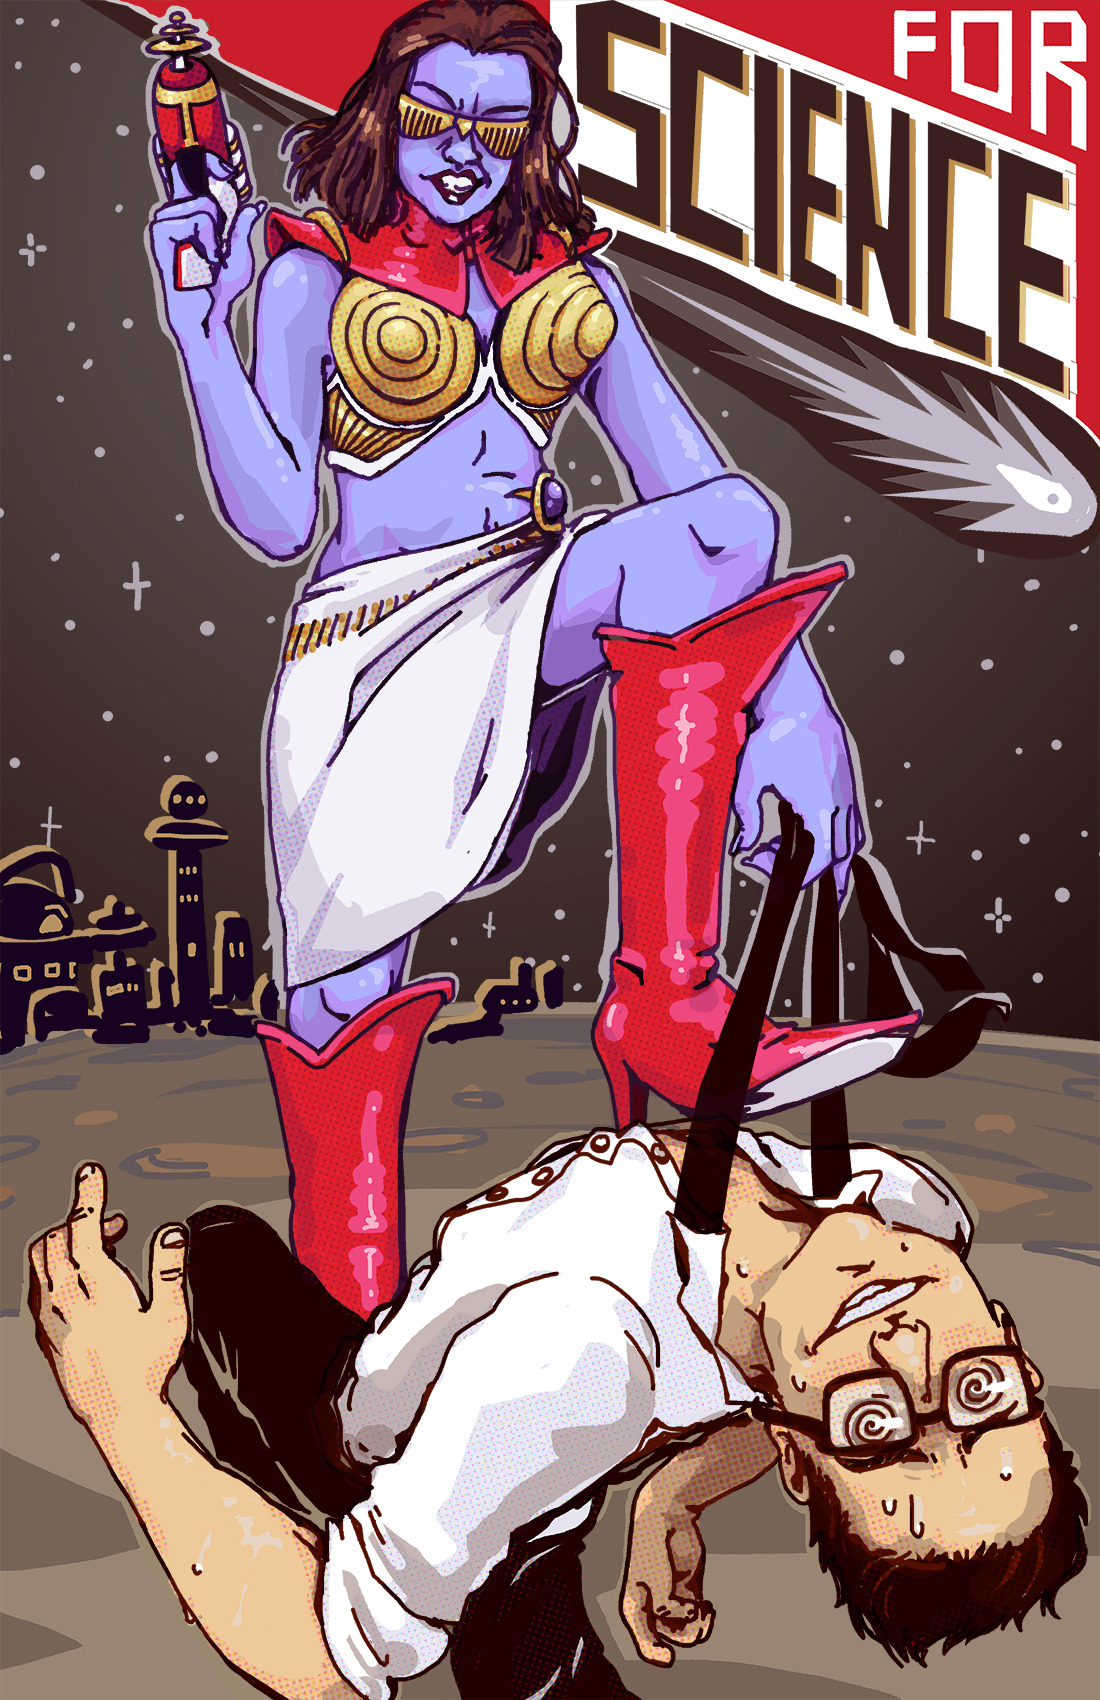 A blue alien woman with a raygun steps on John Flansburgh's neck. In the background there is a far-off space city and a comet.